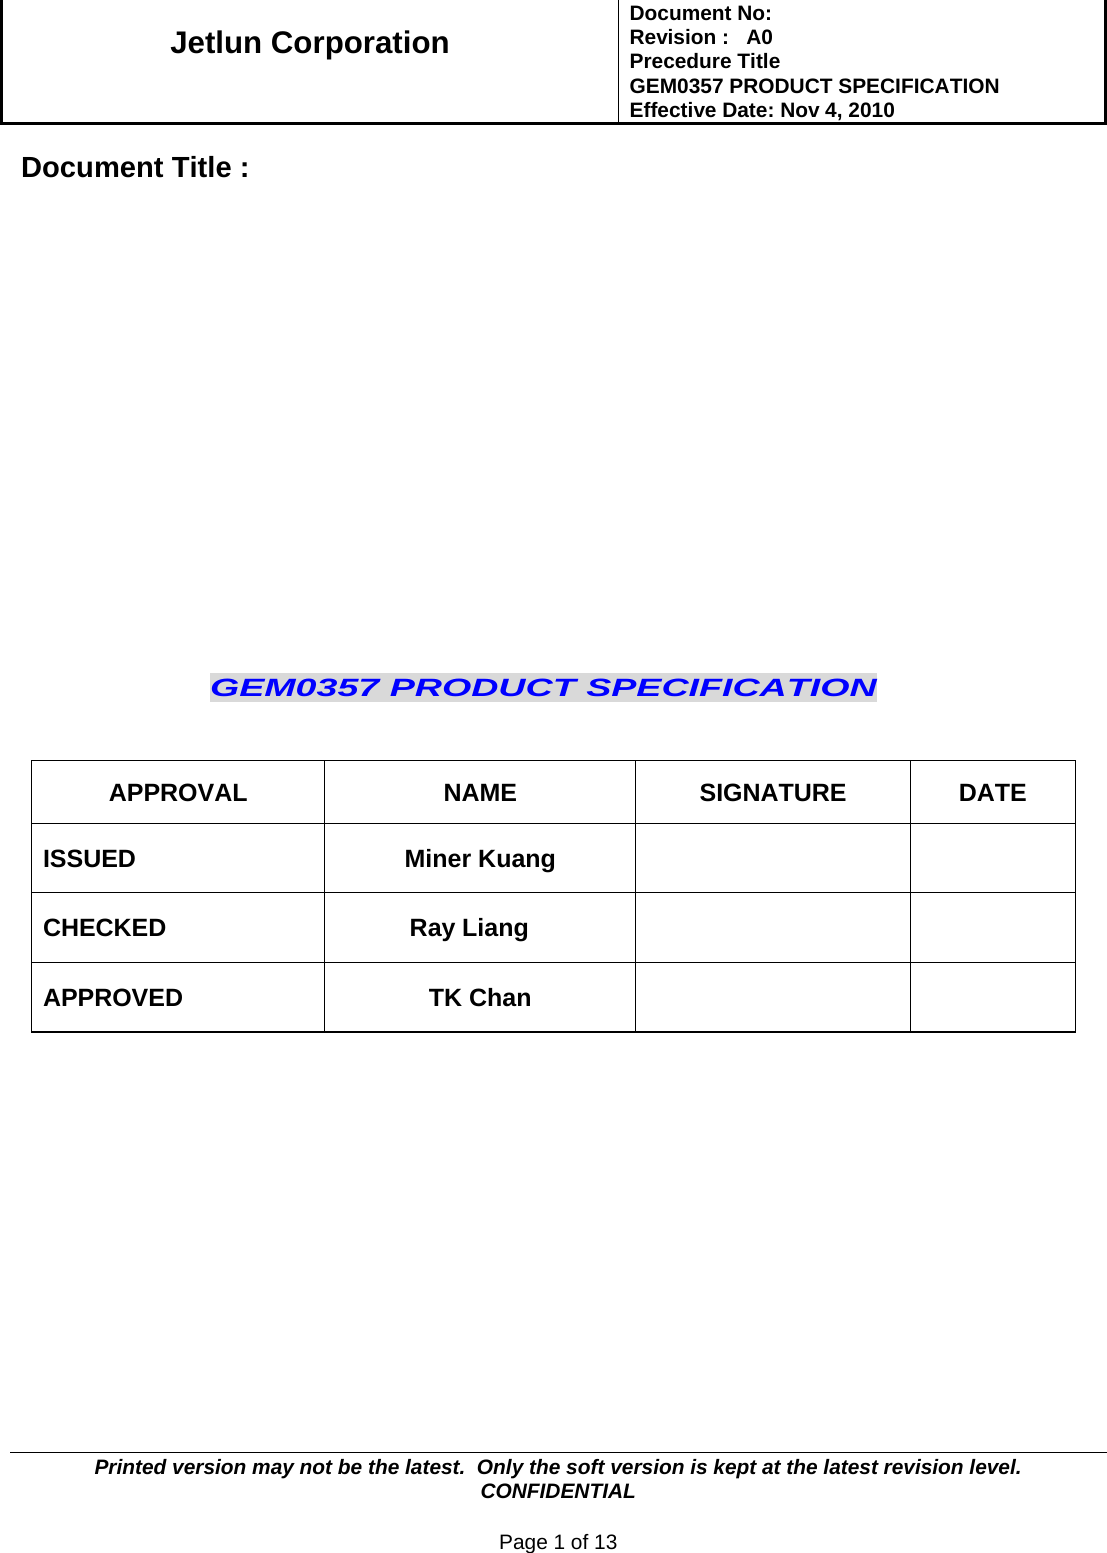   Jetlun Corporation Document No:        Revision :   A0 Precedure Title  GEM0357 PRODUCT SPECIFICATION Effective Date: Nov 4, 2010   Printed version may not be the latest.  Only the soft version is kept at the latest revision level.      CONFIDENTIAL  Page 1 of 13   Document Title :                     GEM0357 PRODUCT SPECIFICATION                                                                             APPROVAL NAME SIGNATURE DATE ISSUED Miner Kuang   CHECKED Ray Liang   APPROVED TK Chan                